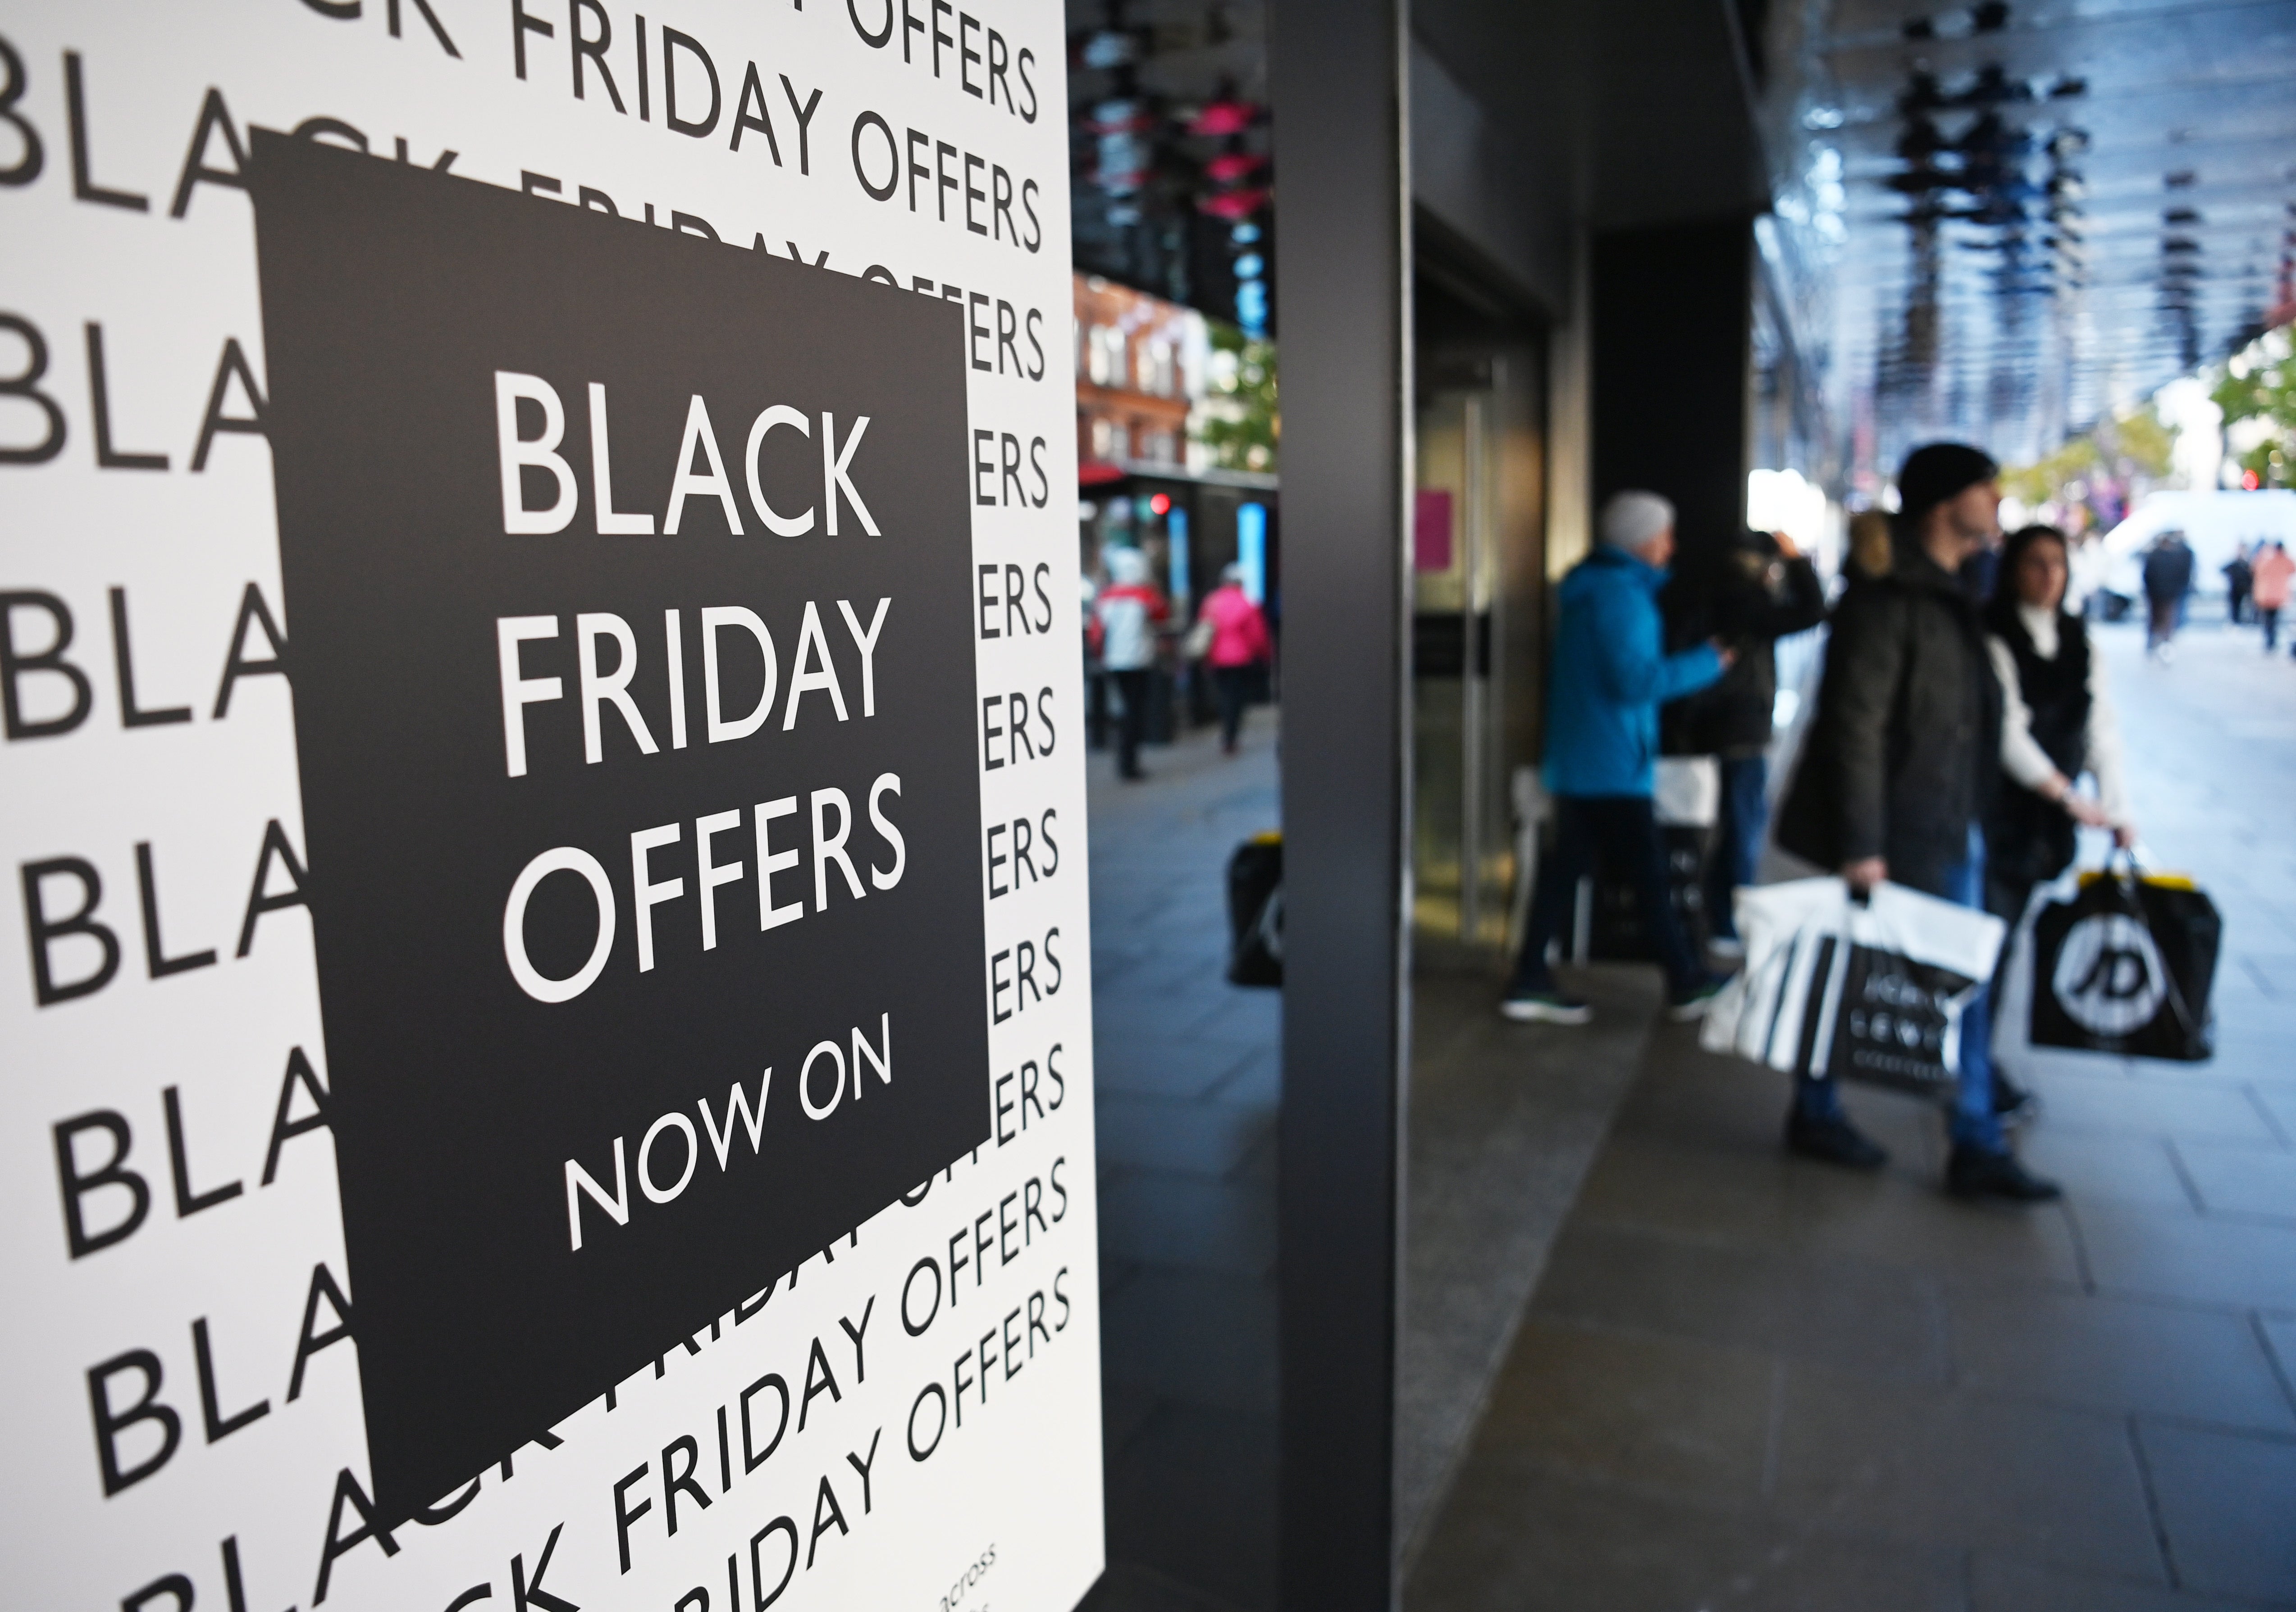 Black Friday promises some relief for hard-pressed retailers